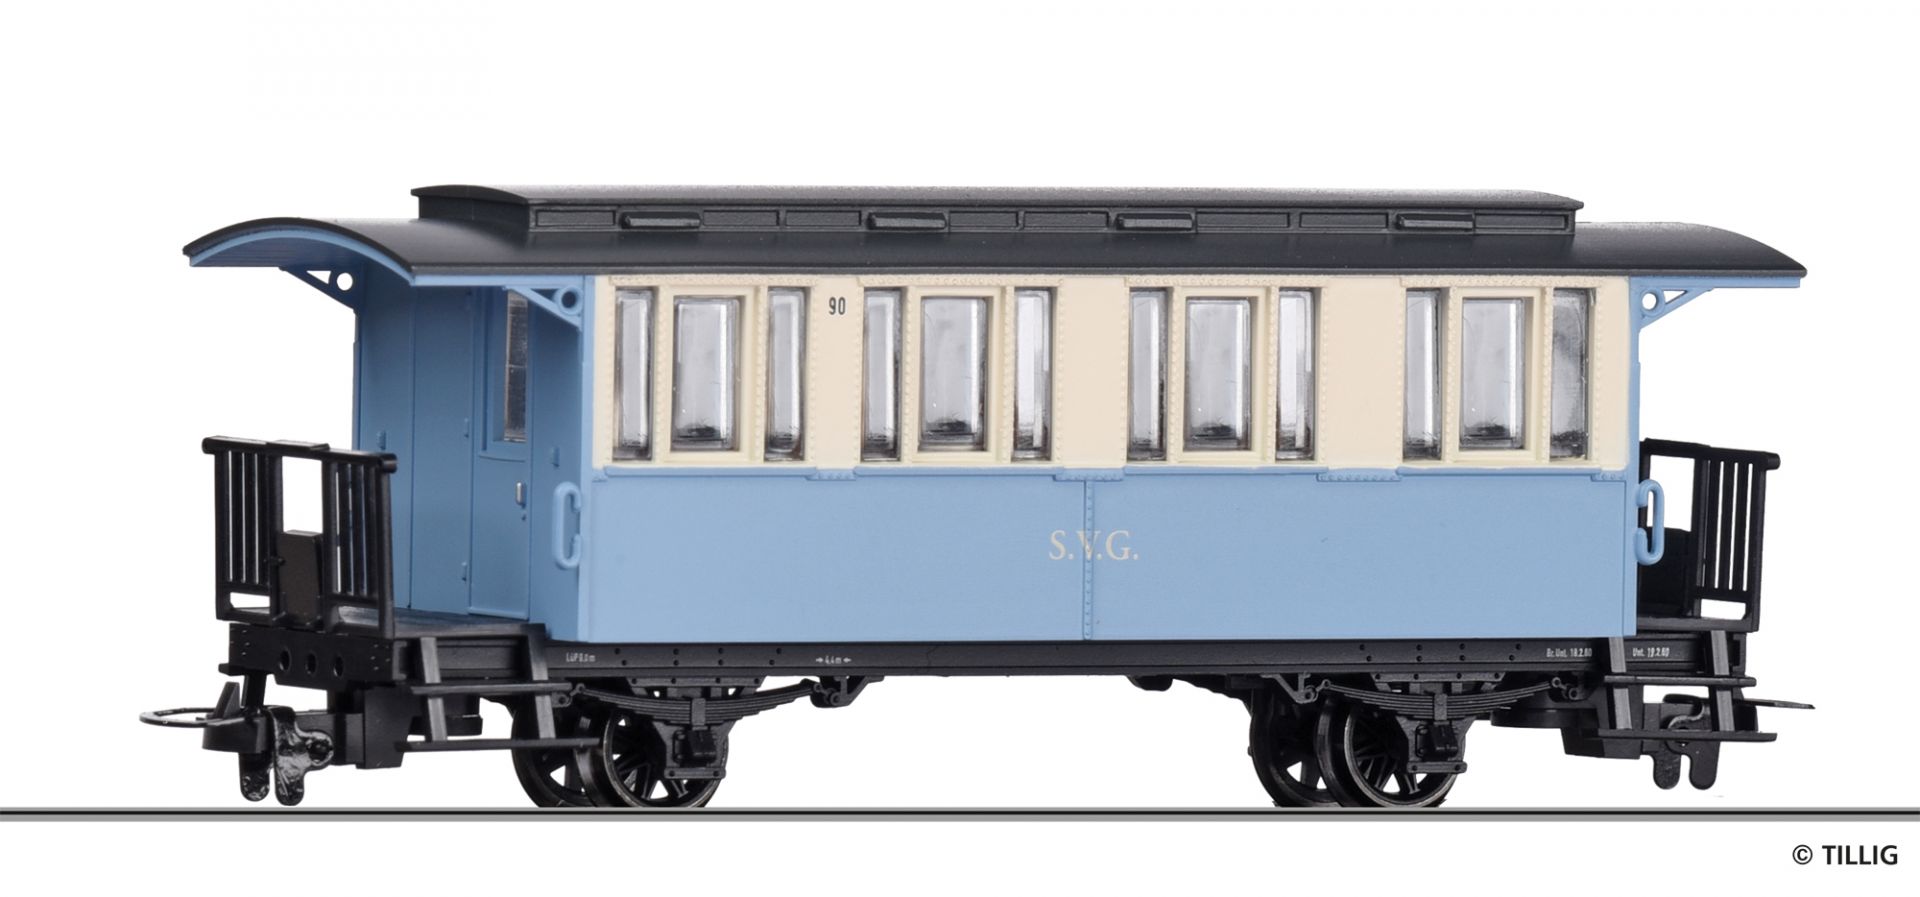 03906 | Passenger coach Sylter Inselbahn -sold out-